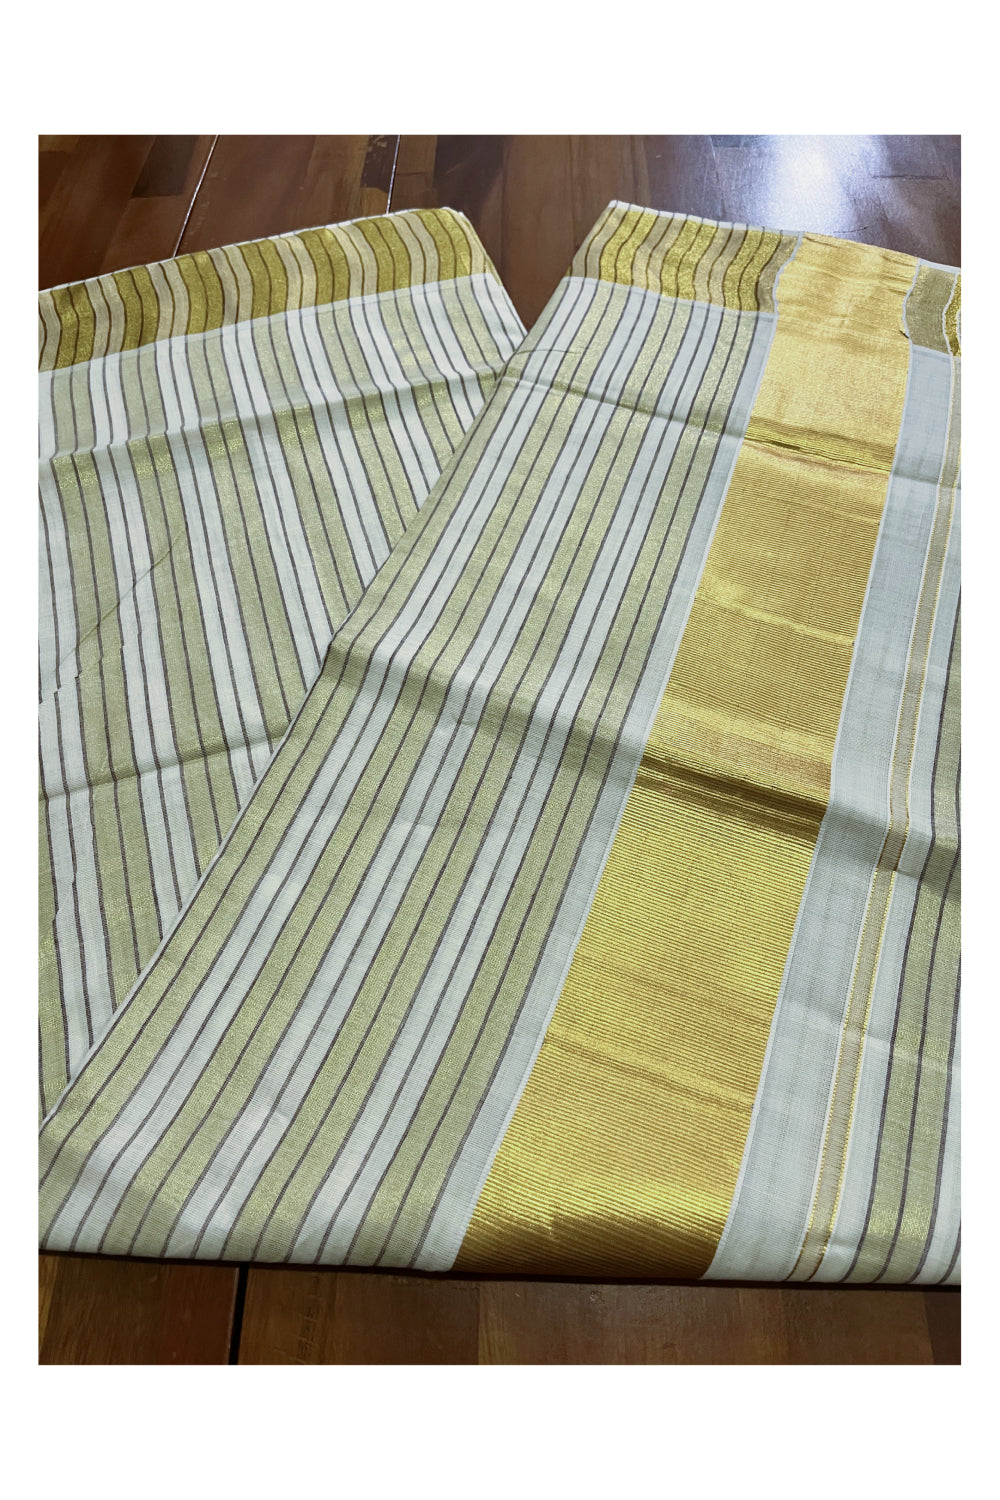 Pure Cotton Kerala Kasavu Saree with Lines Designs on Body and Brown Lines on Munthani